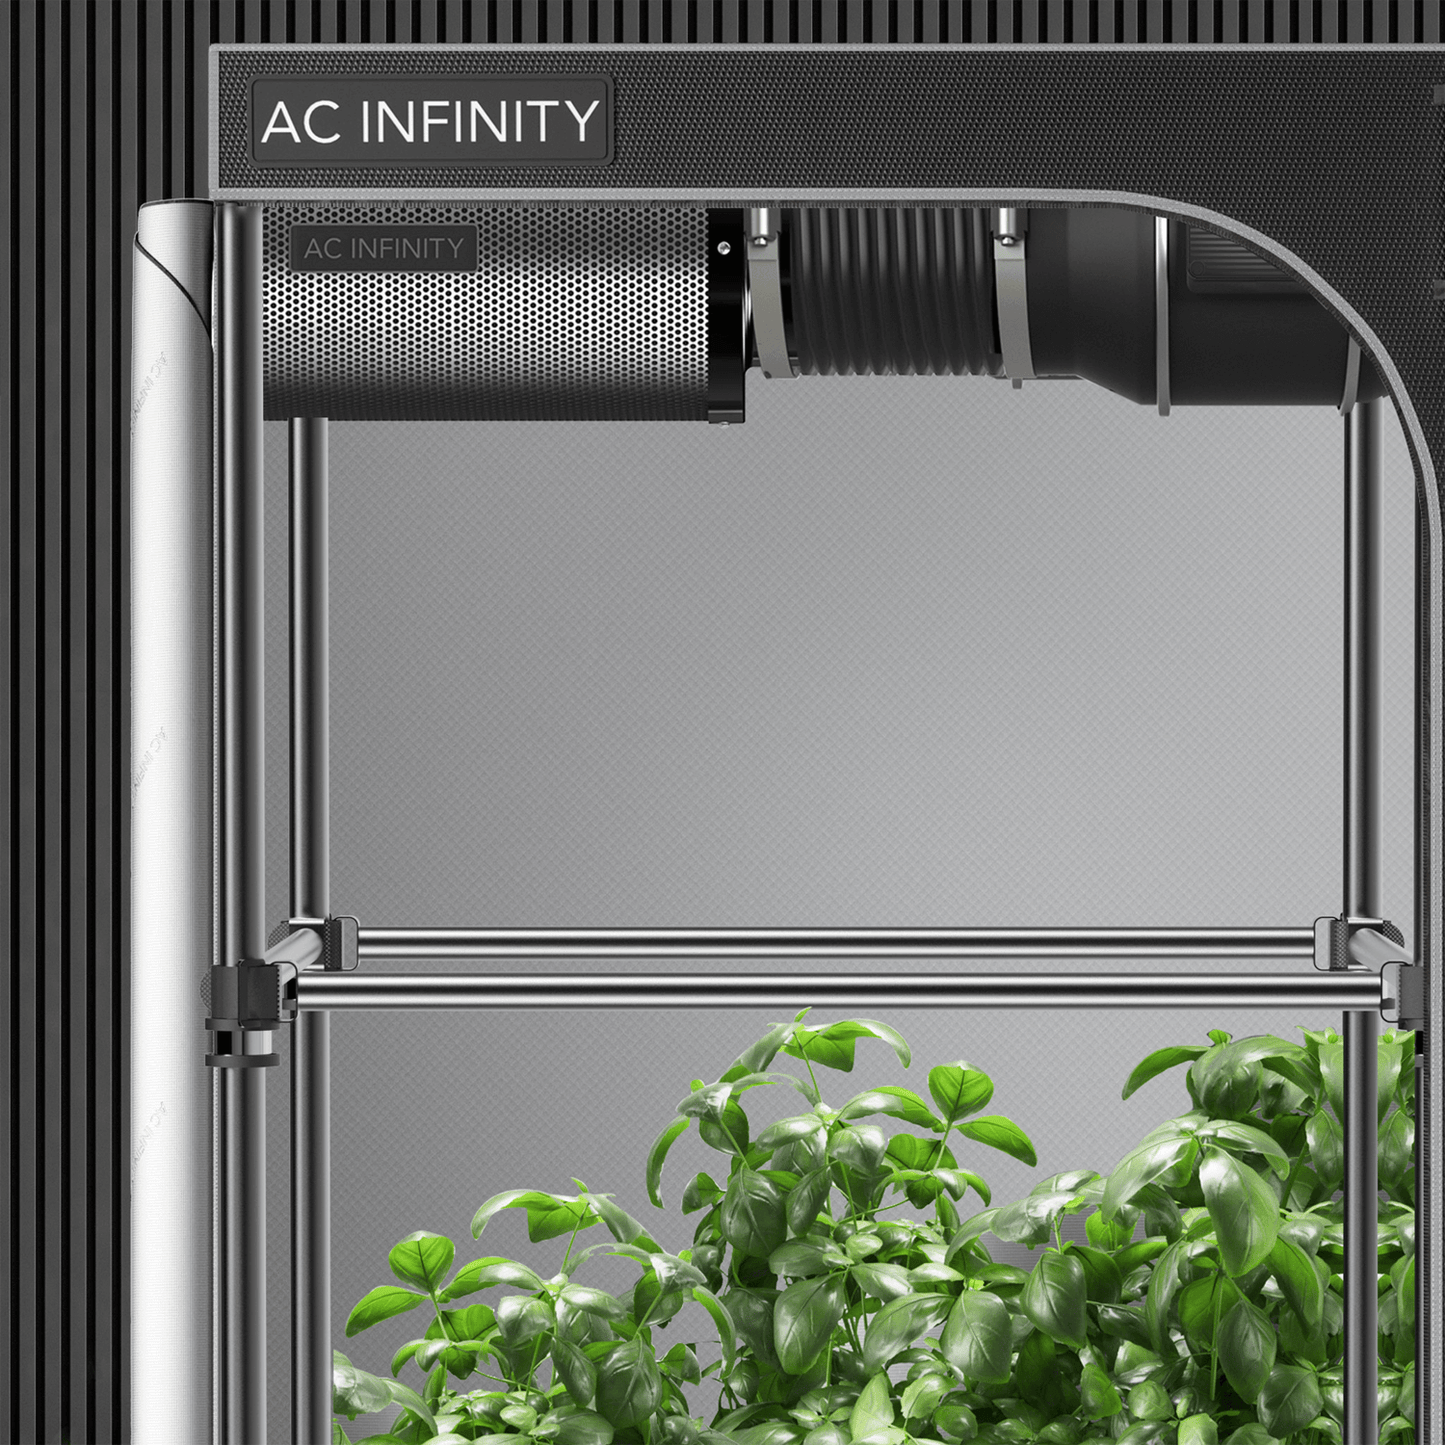 AC Infinity Grow Tent Mounting Bars, for Indoor Grow Spaces, 5x5' AC-HCA55 Grow Tents